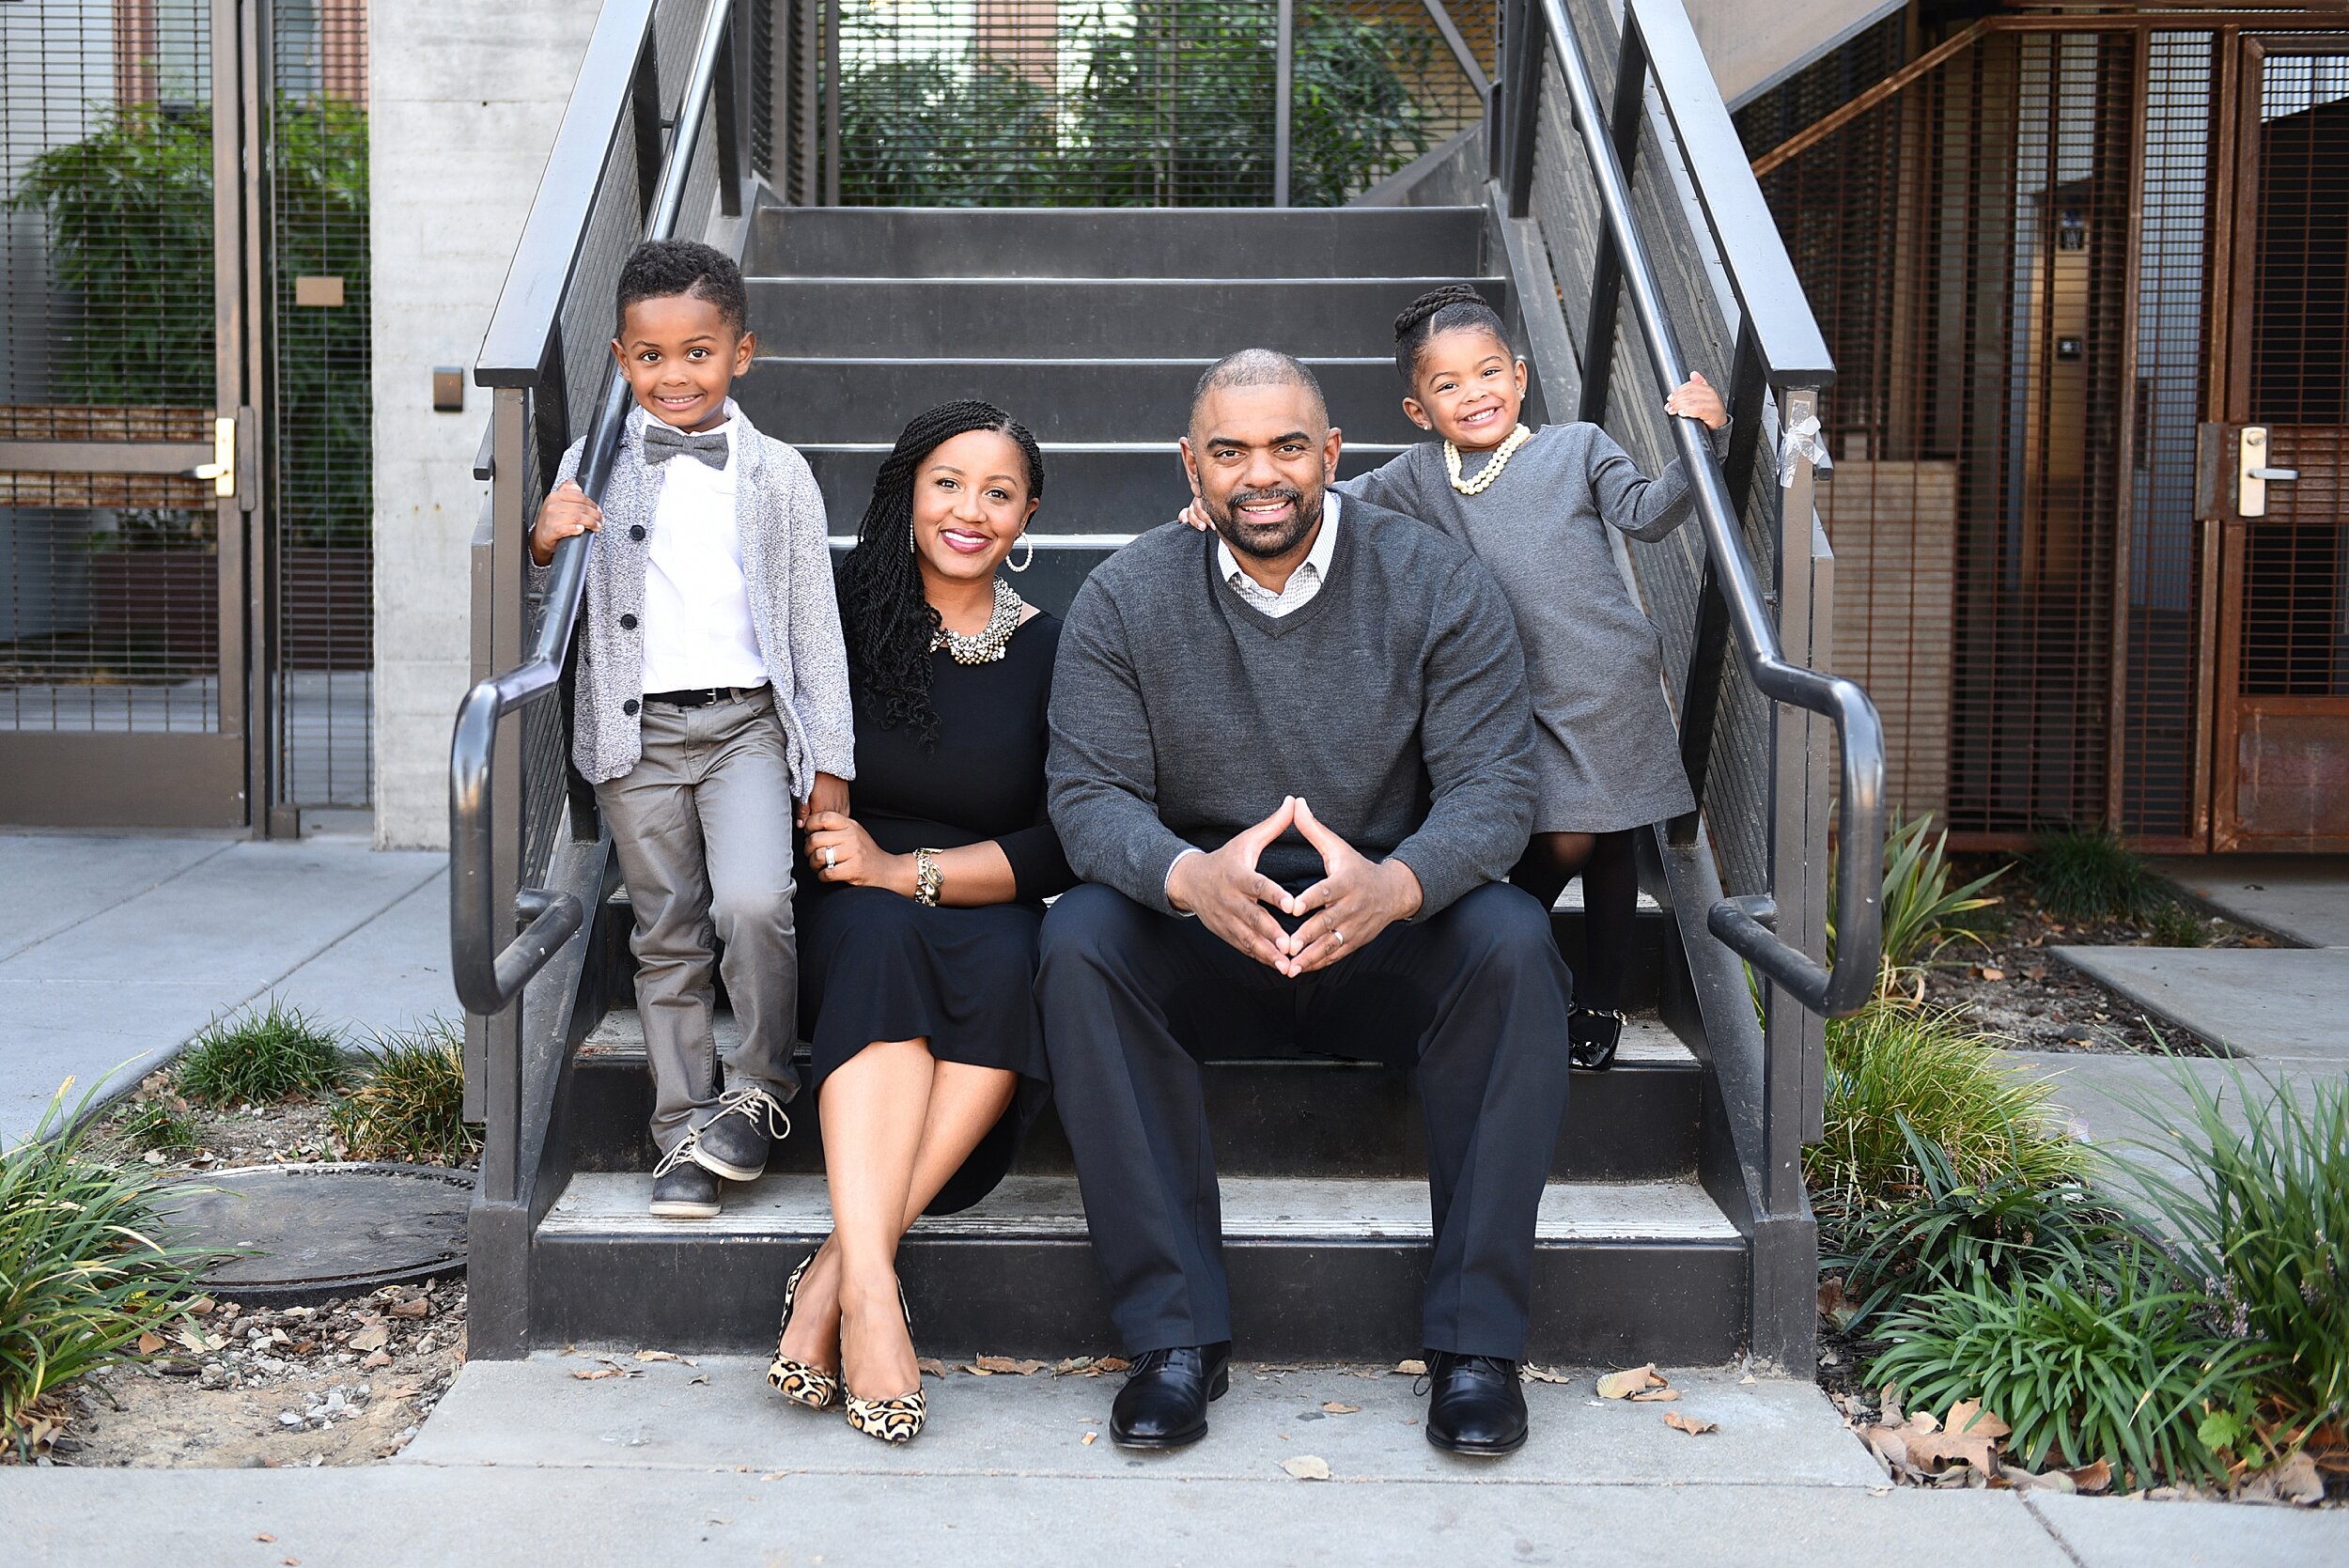 christie_spencer_photography_families_0027.jpg